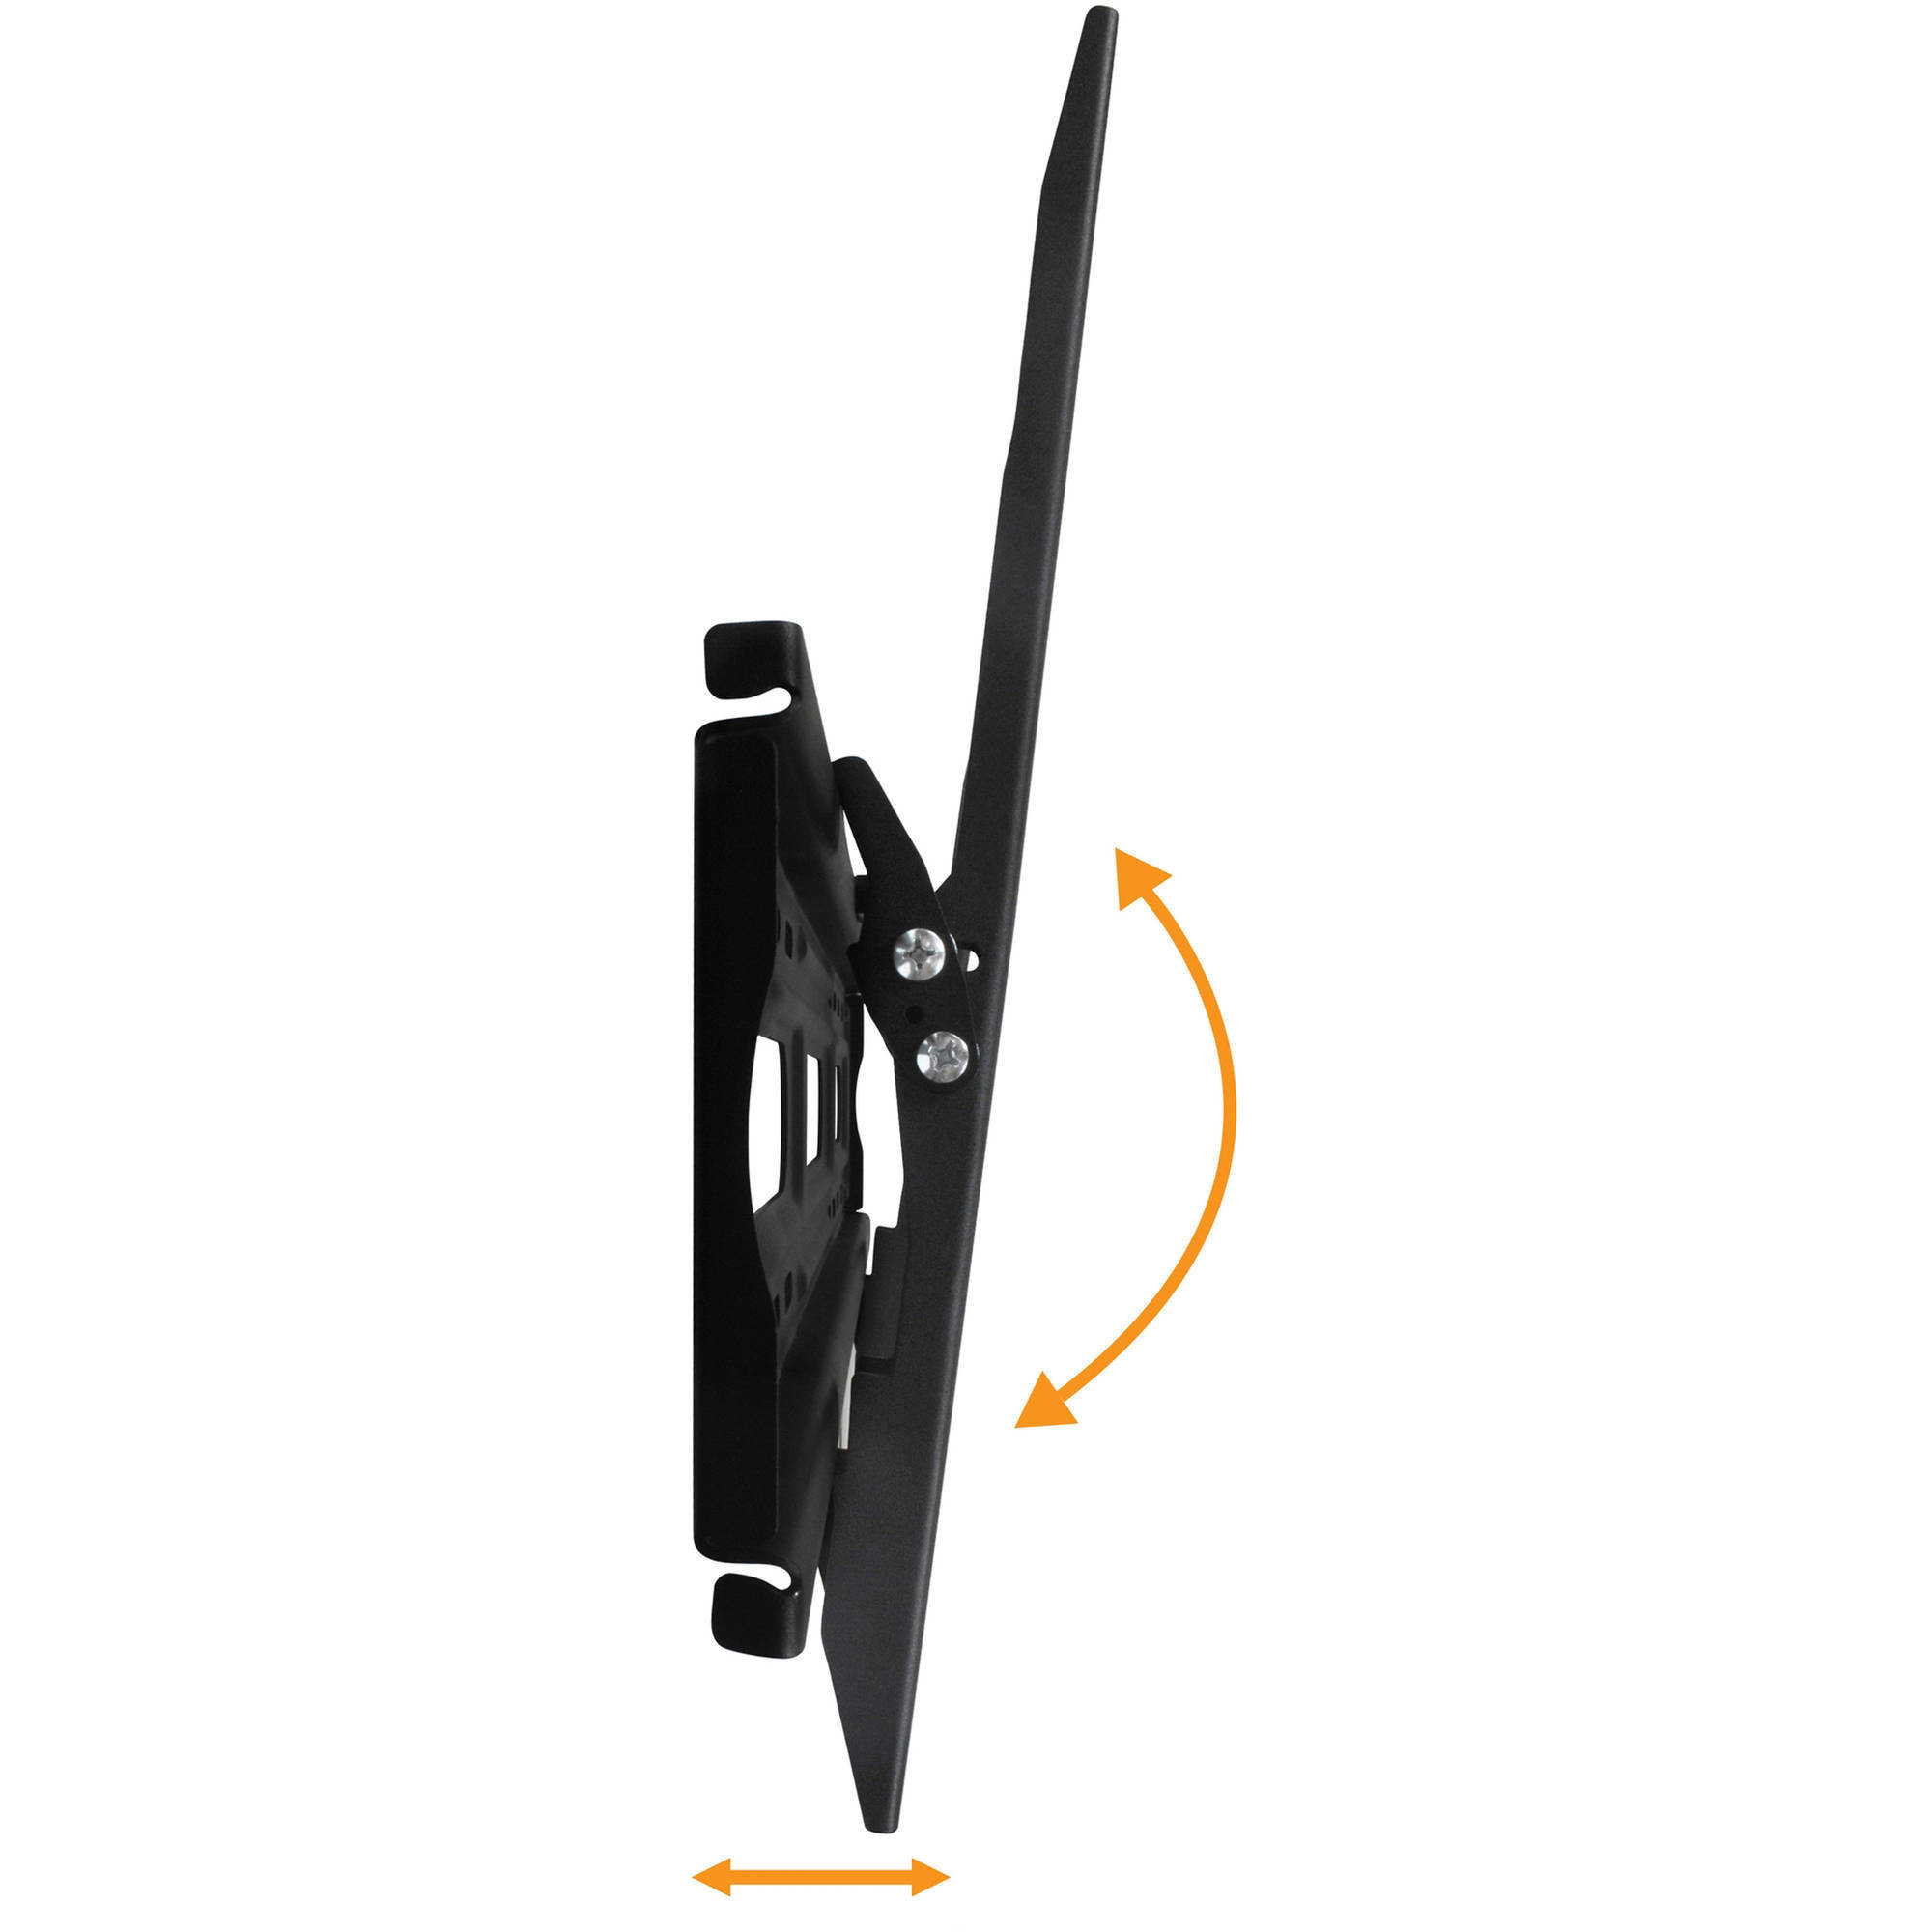 DuraPro Tilting Wall Mount Kit for 24" to 84" TVs + Bonus HDMI Cable (DRP790TT) - image 3 of 8